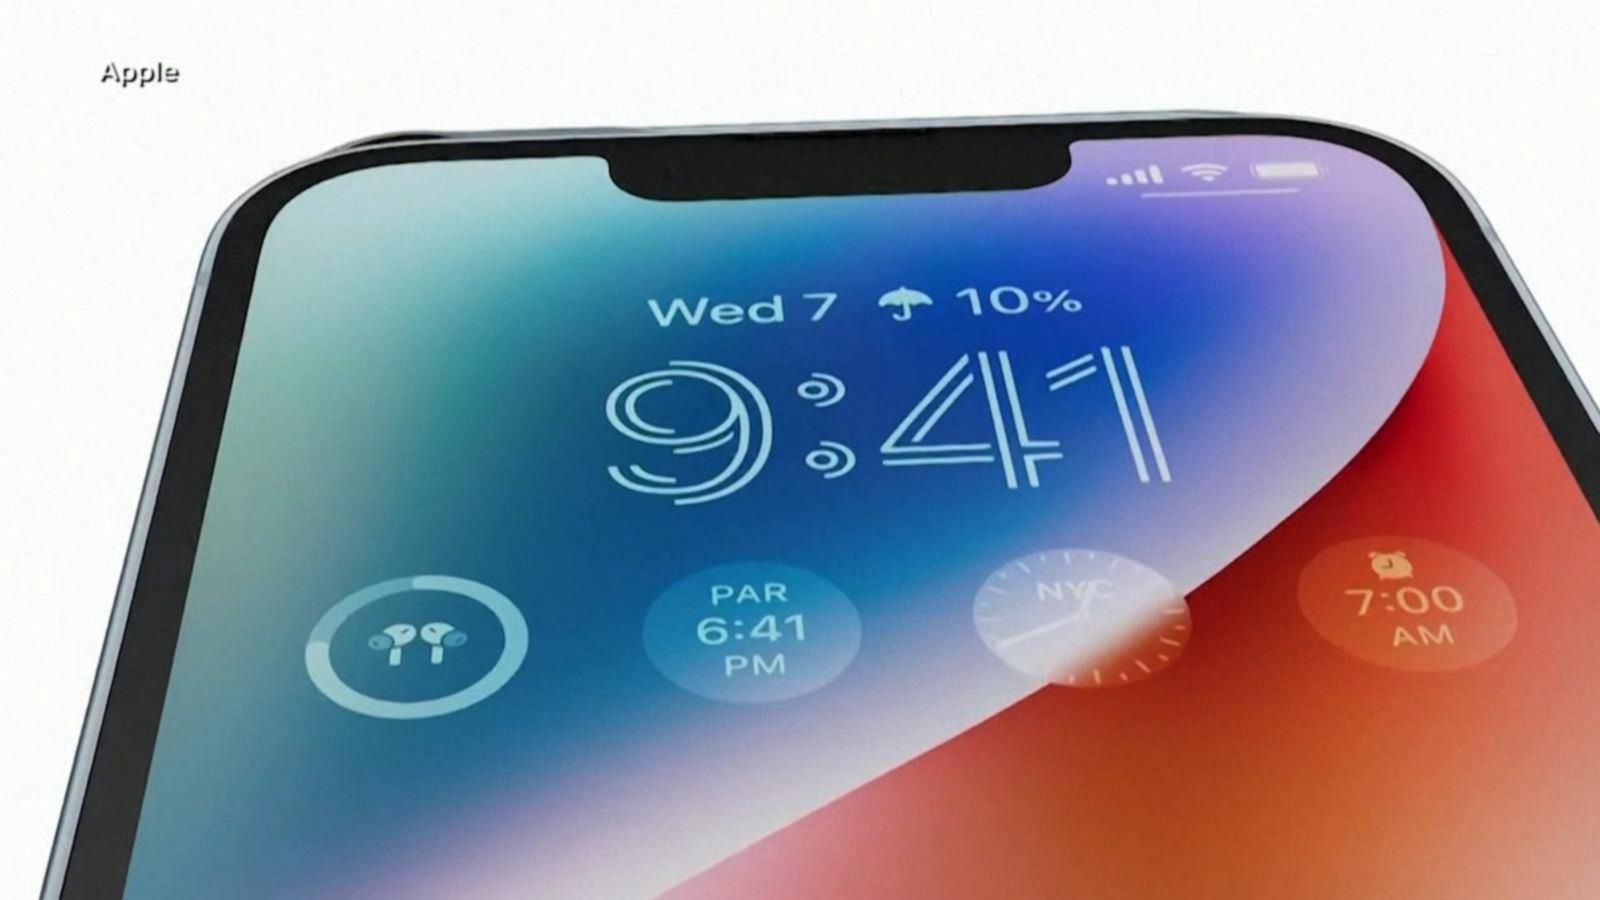 Working out with Apple Watch? These smart scales sync weight with iPhone  [August 2023]